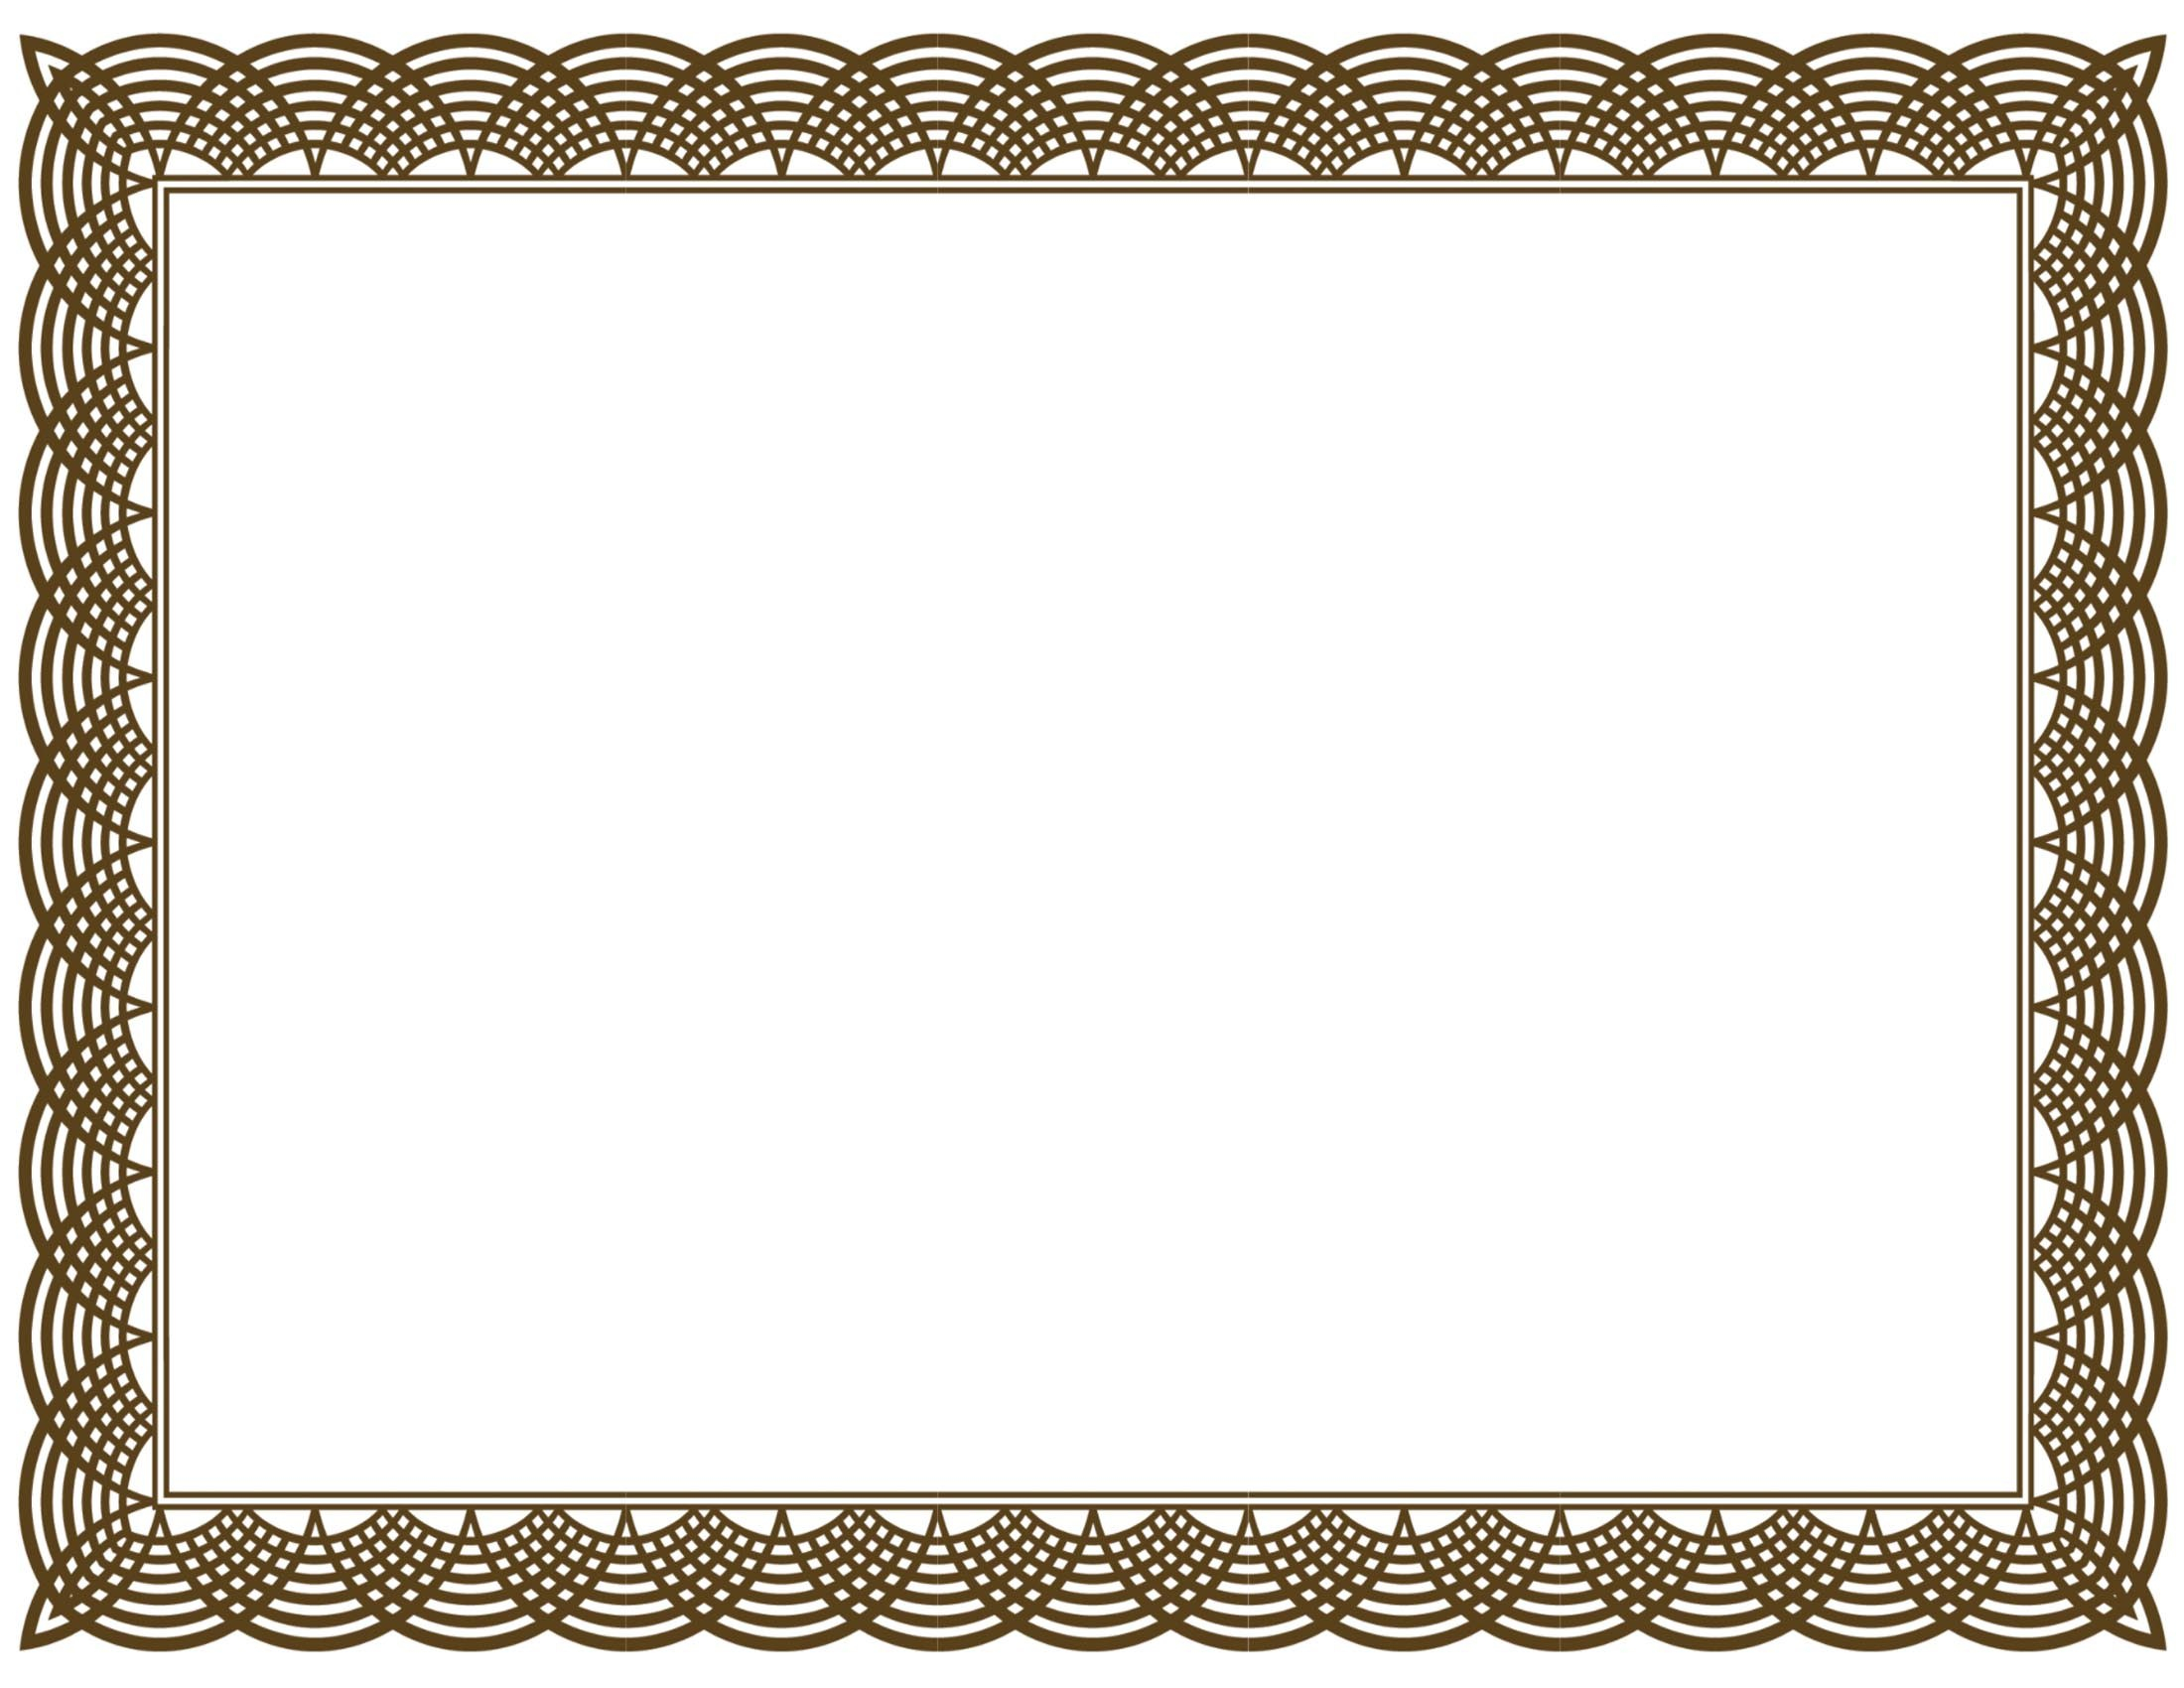 Free Certificate Borders Download Free Clip Art Free Clip Art On in Free Printable Certificate Border Templates